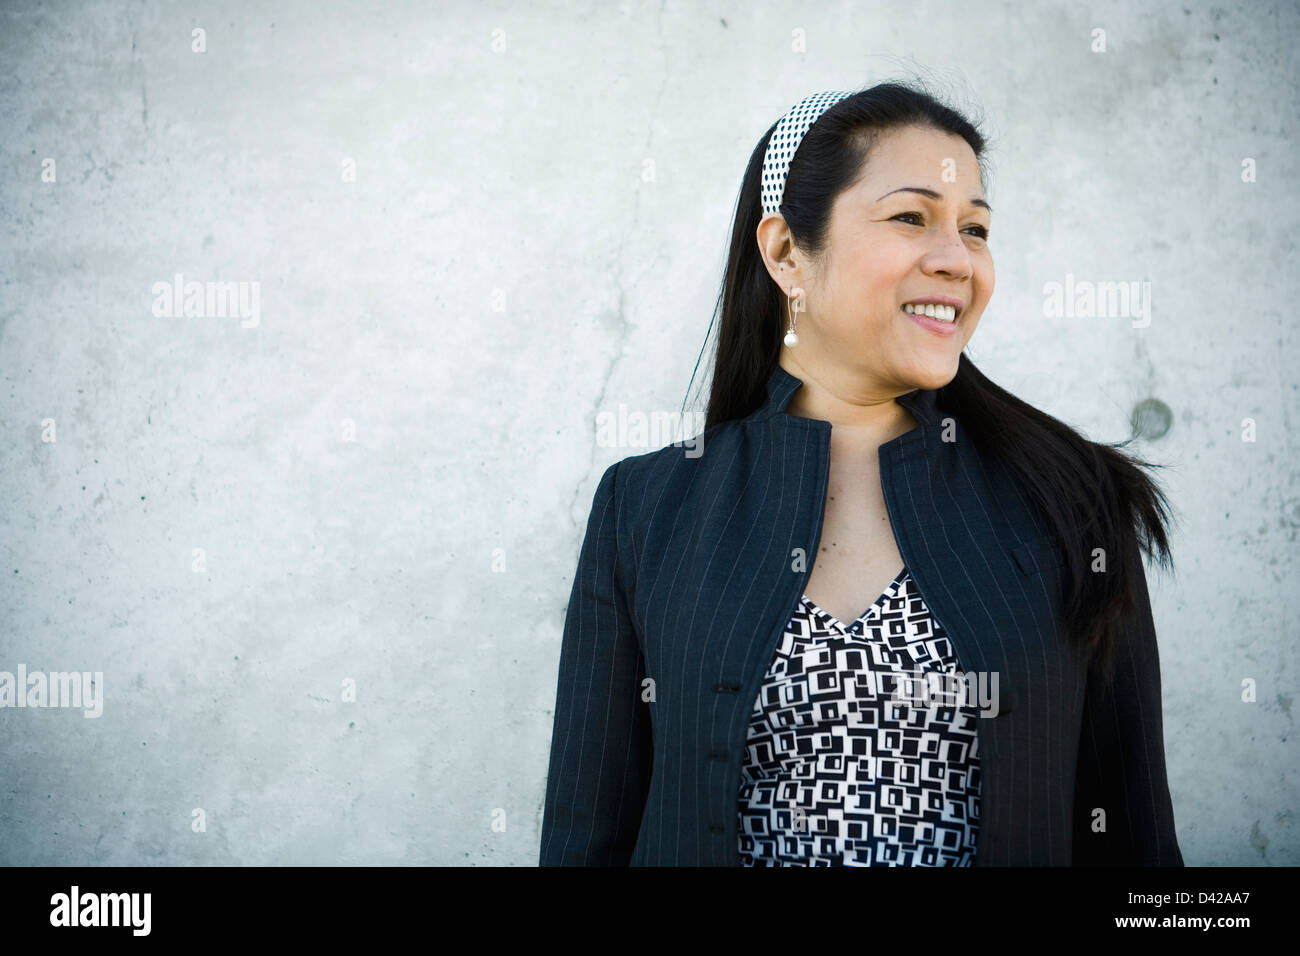 a mid-aged businesswoman self-assured and happy. Stock Photo